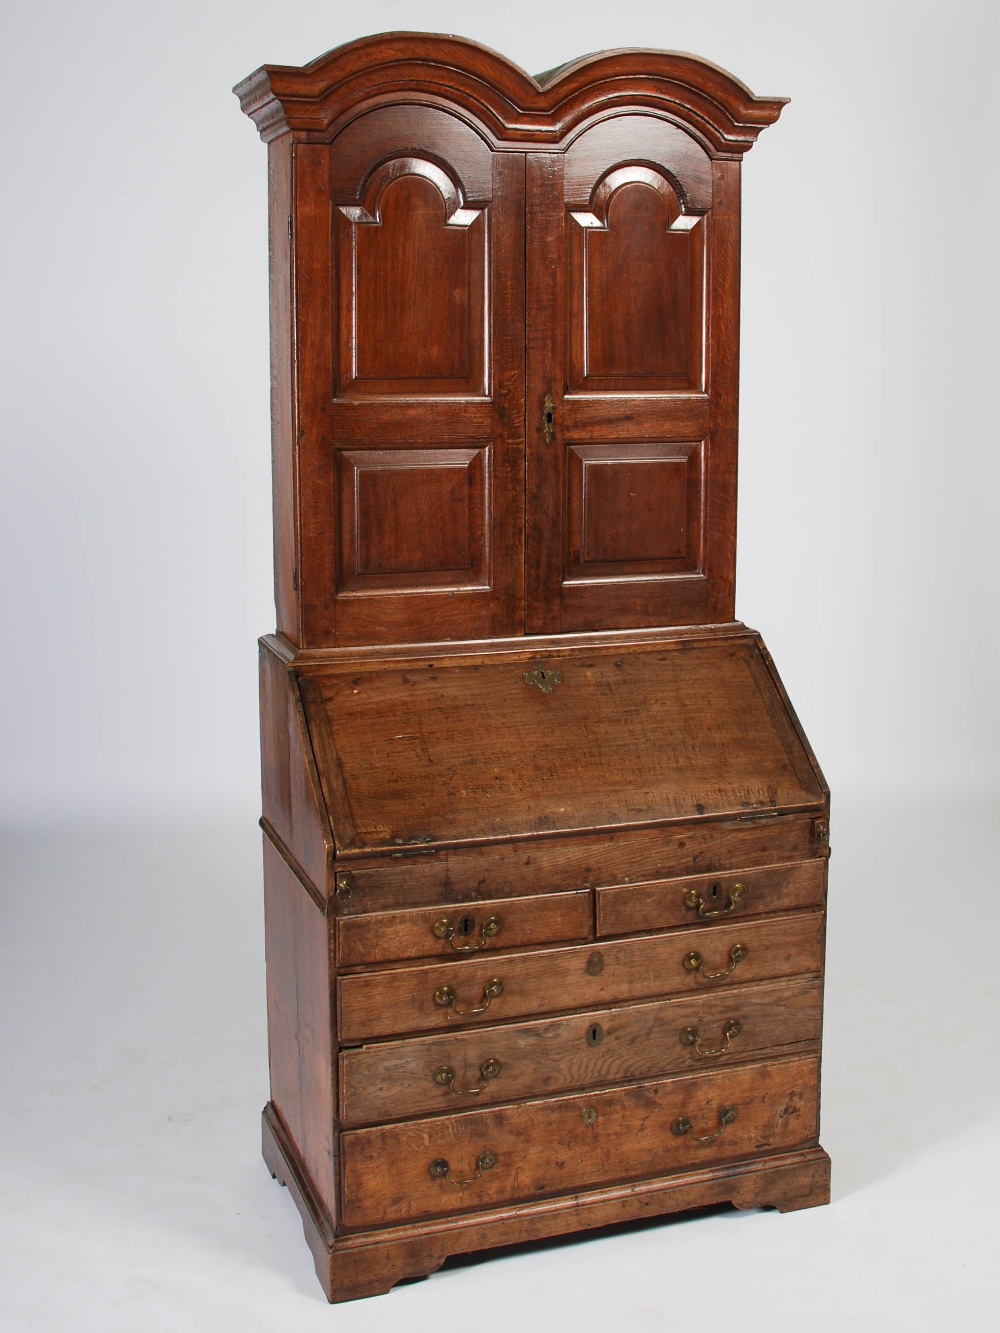 A George III oak bureau bookcase, the double domed moulded cornice above a pair of panelled cupboard